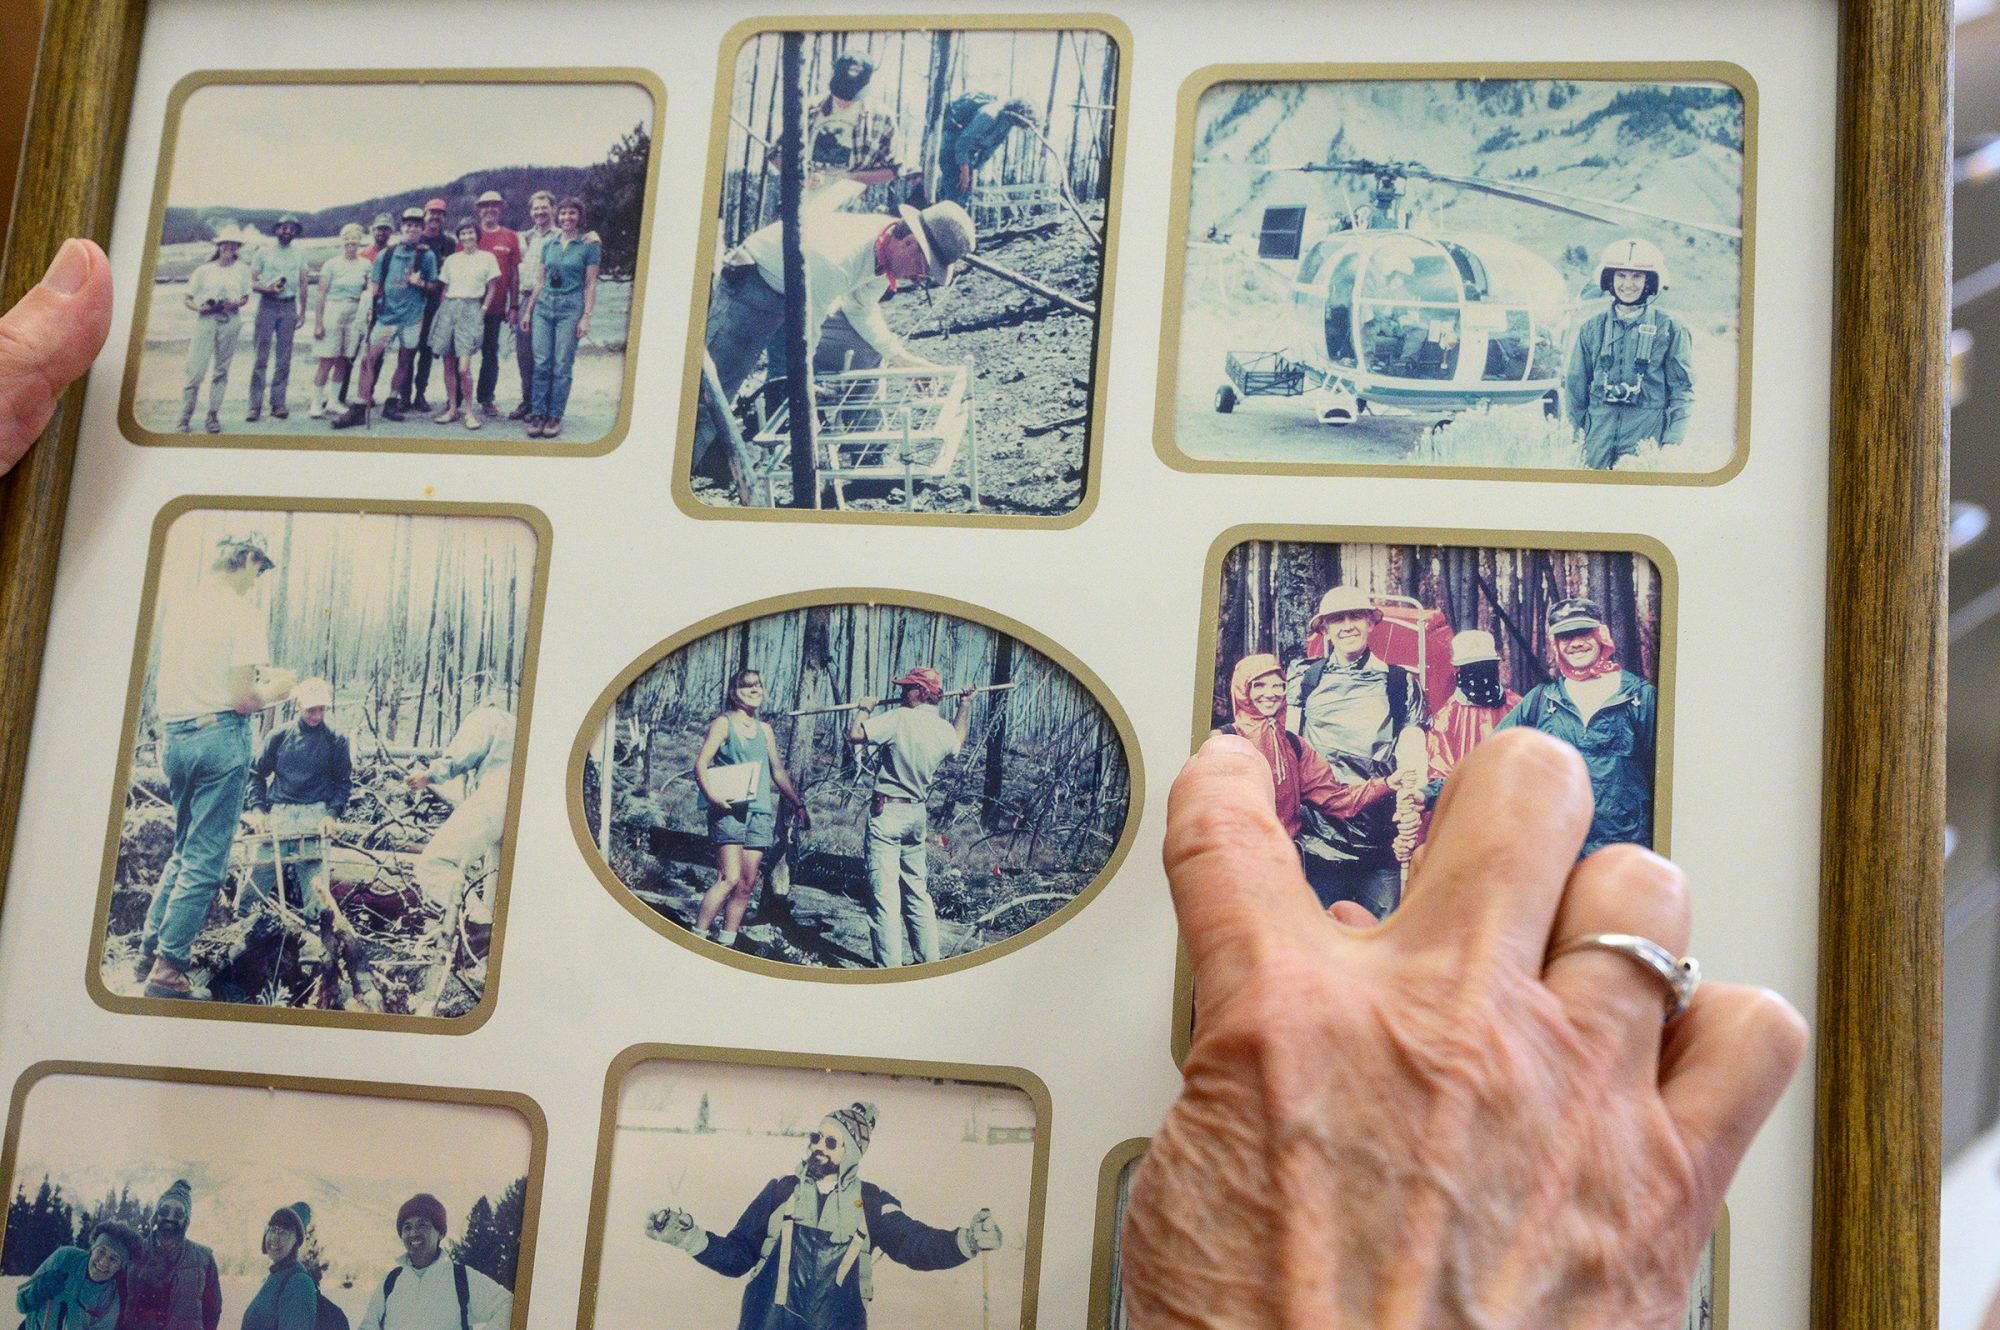 Monica Turner points to people in a faded photo collage.